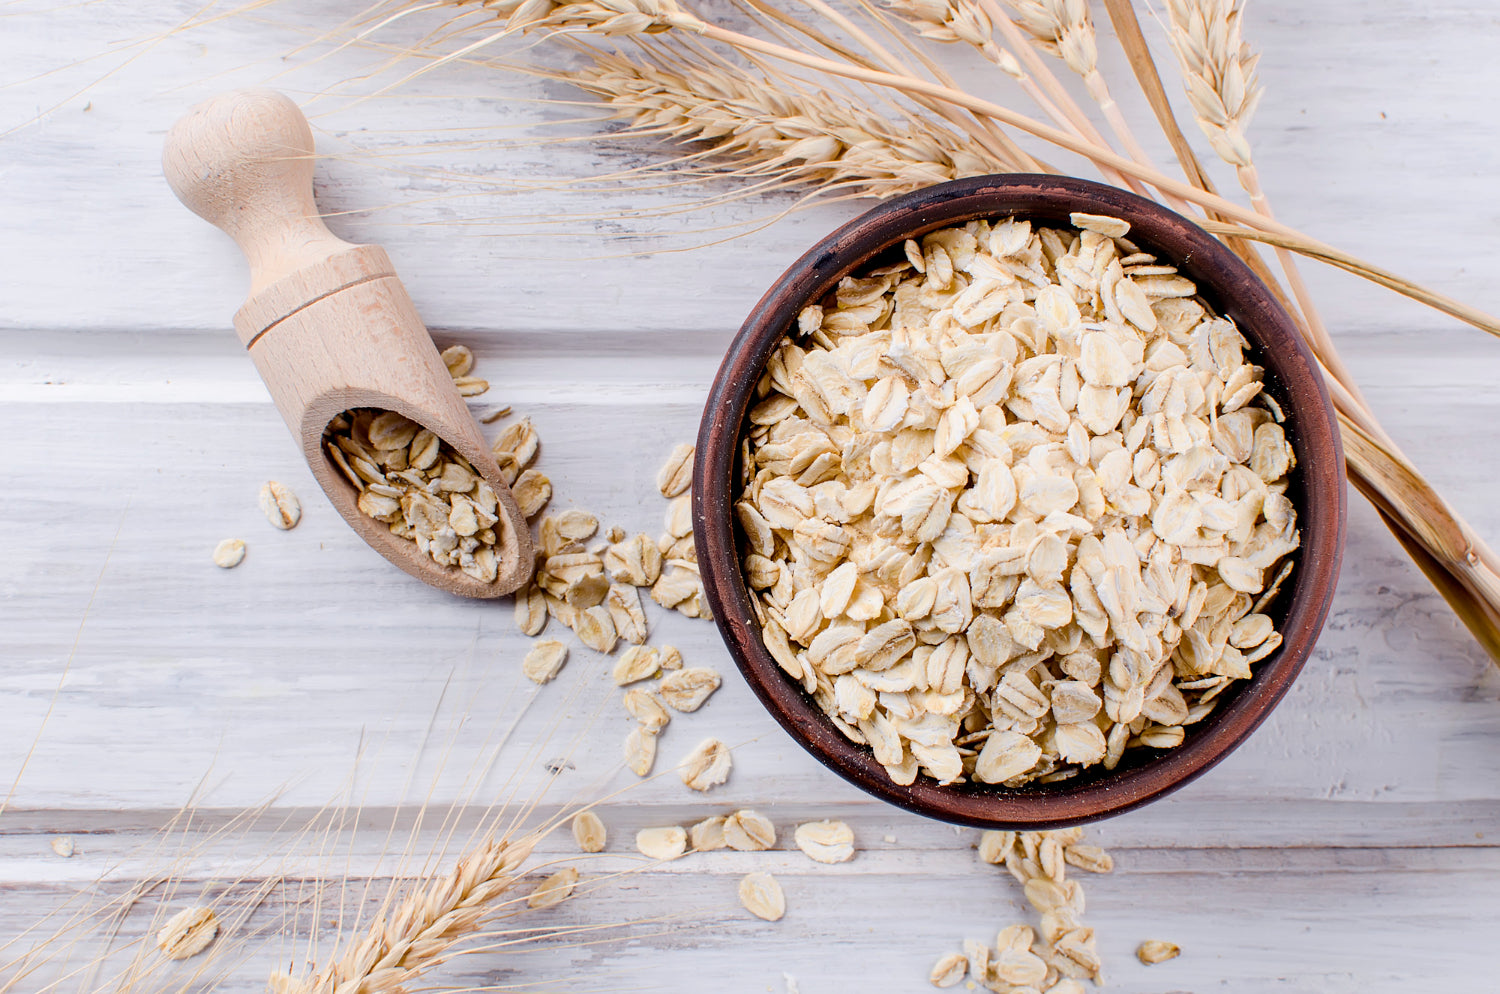 Rolled Oats vs. Quick Oats: main Difference - Be Still Farms- Real, Fine  Organics